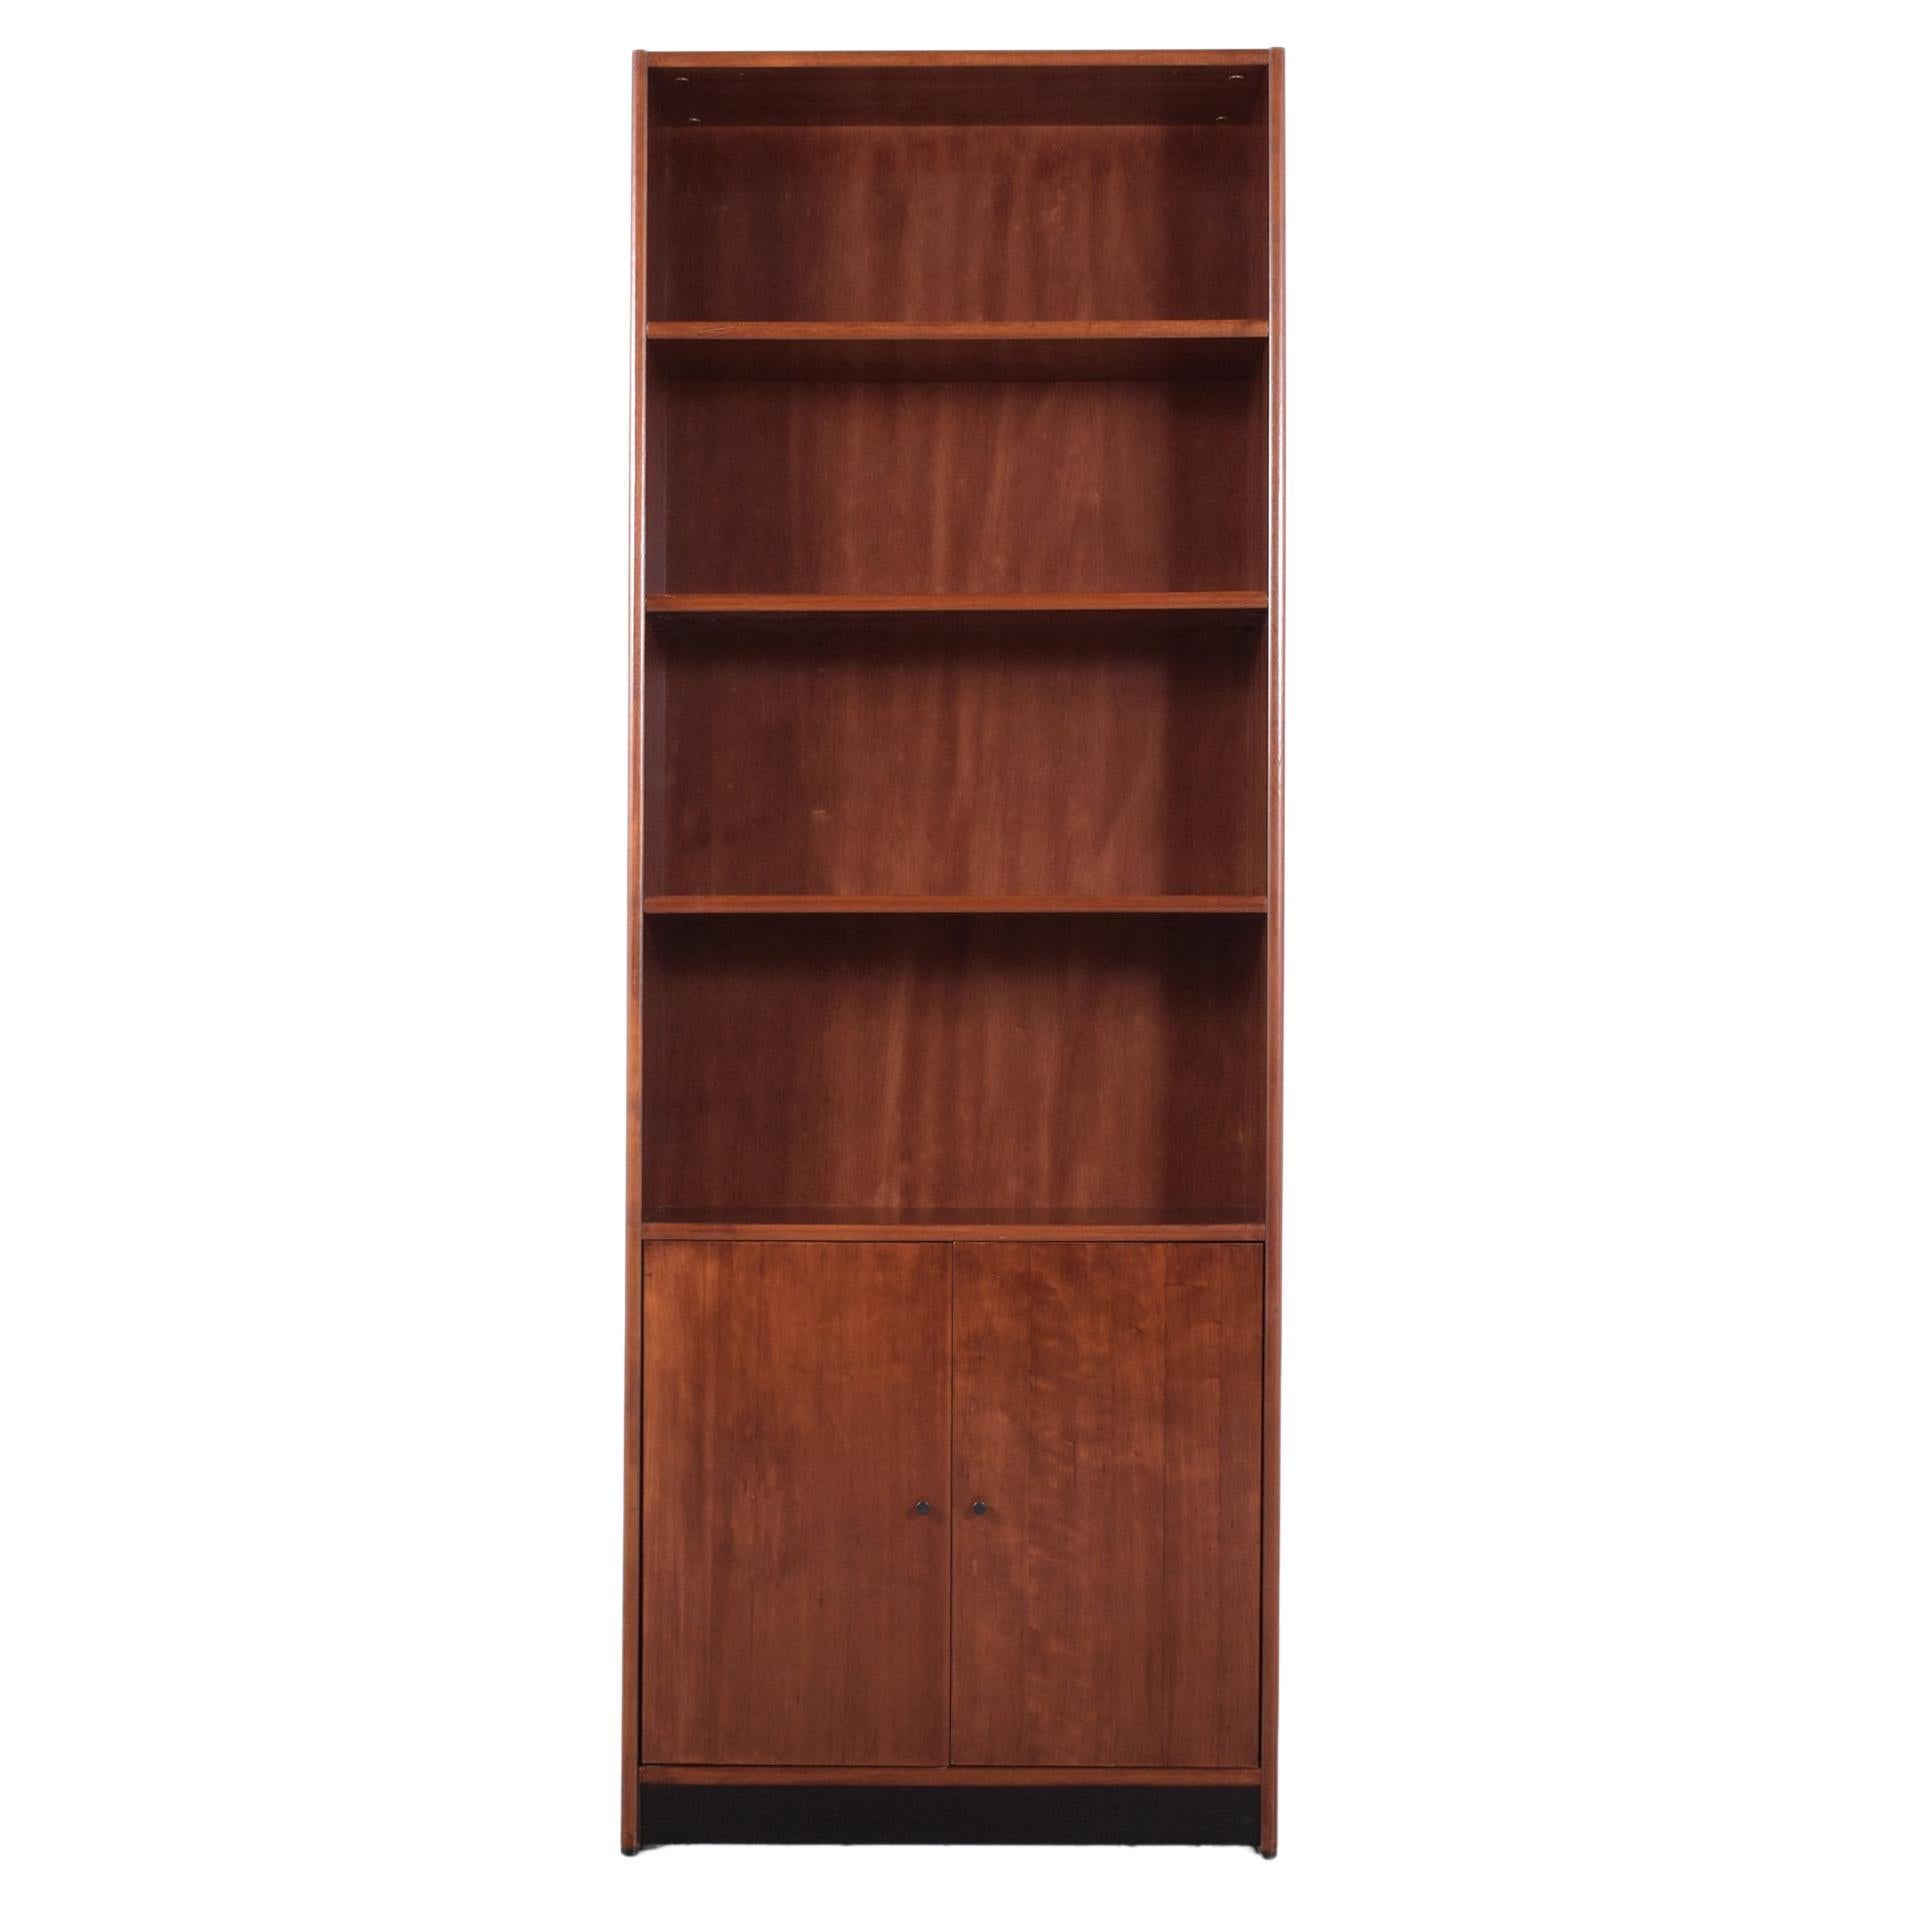 Indulge in the charm of vintage design with our expertly restored mid-century modern bookcase, skillfully crafted by our team of professional craftsmen. This eye-catching 1960s wall unit features three adjustable top shelves and two bottom doors,